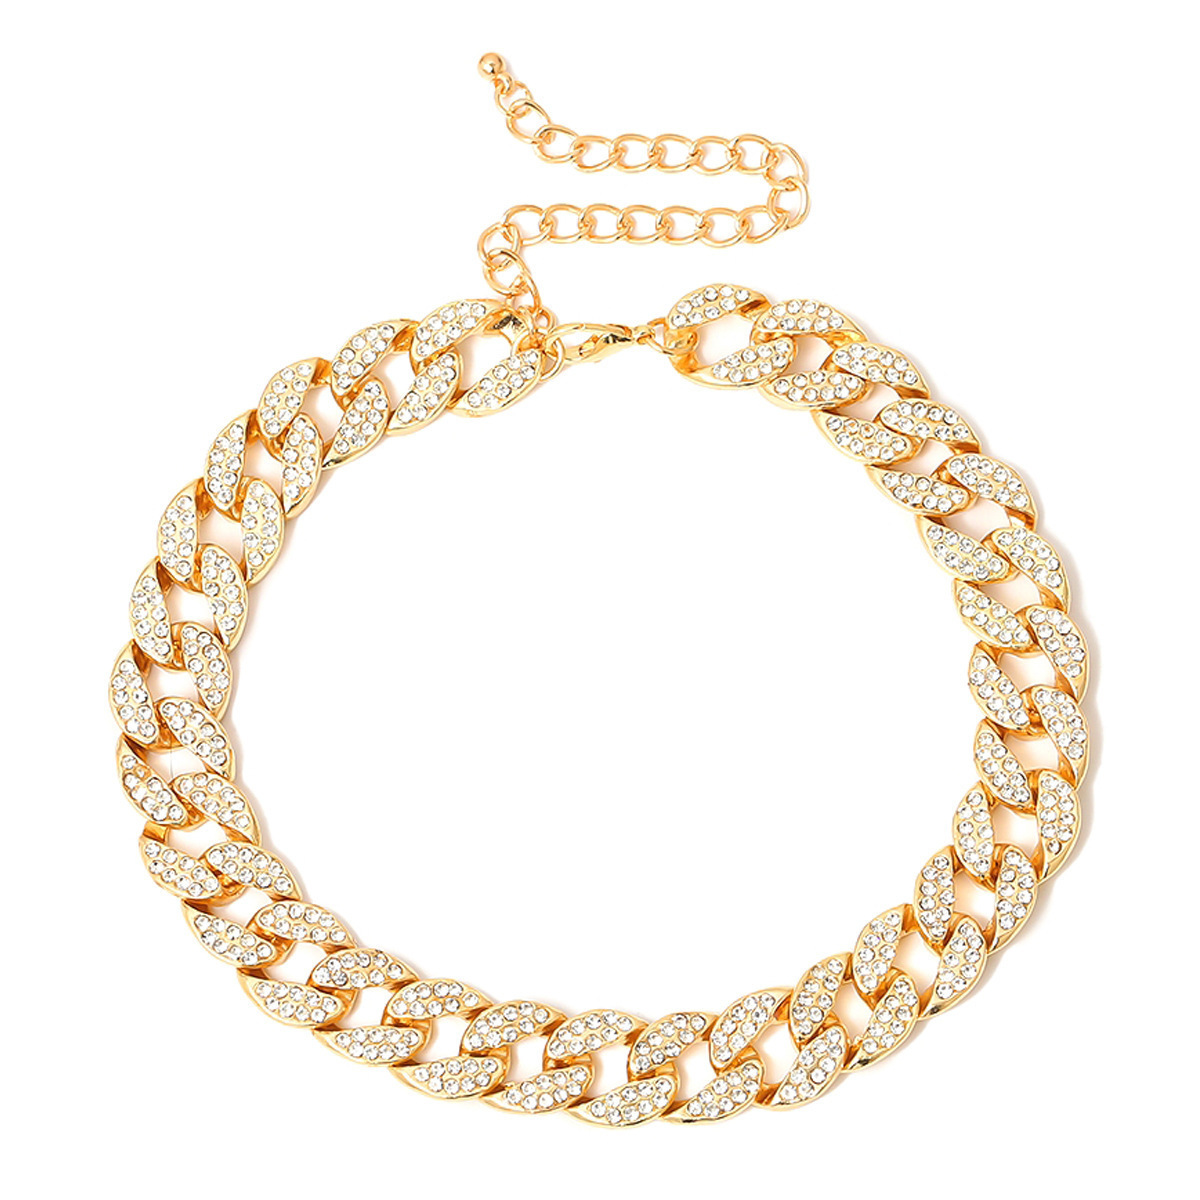 1:Single layer gold necklace 57cm